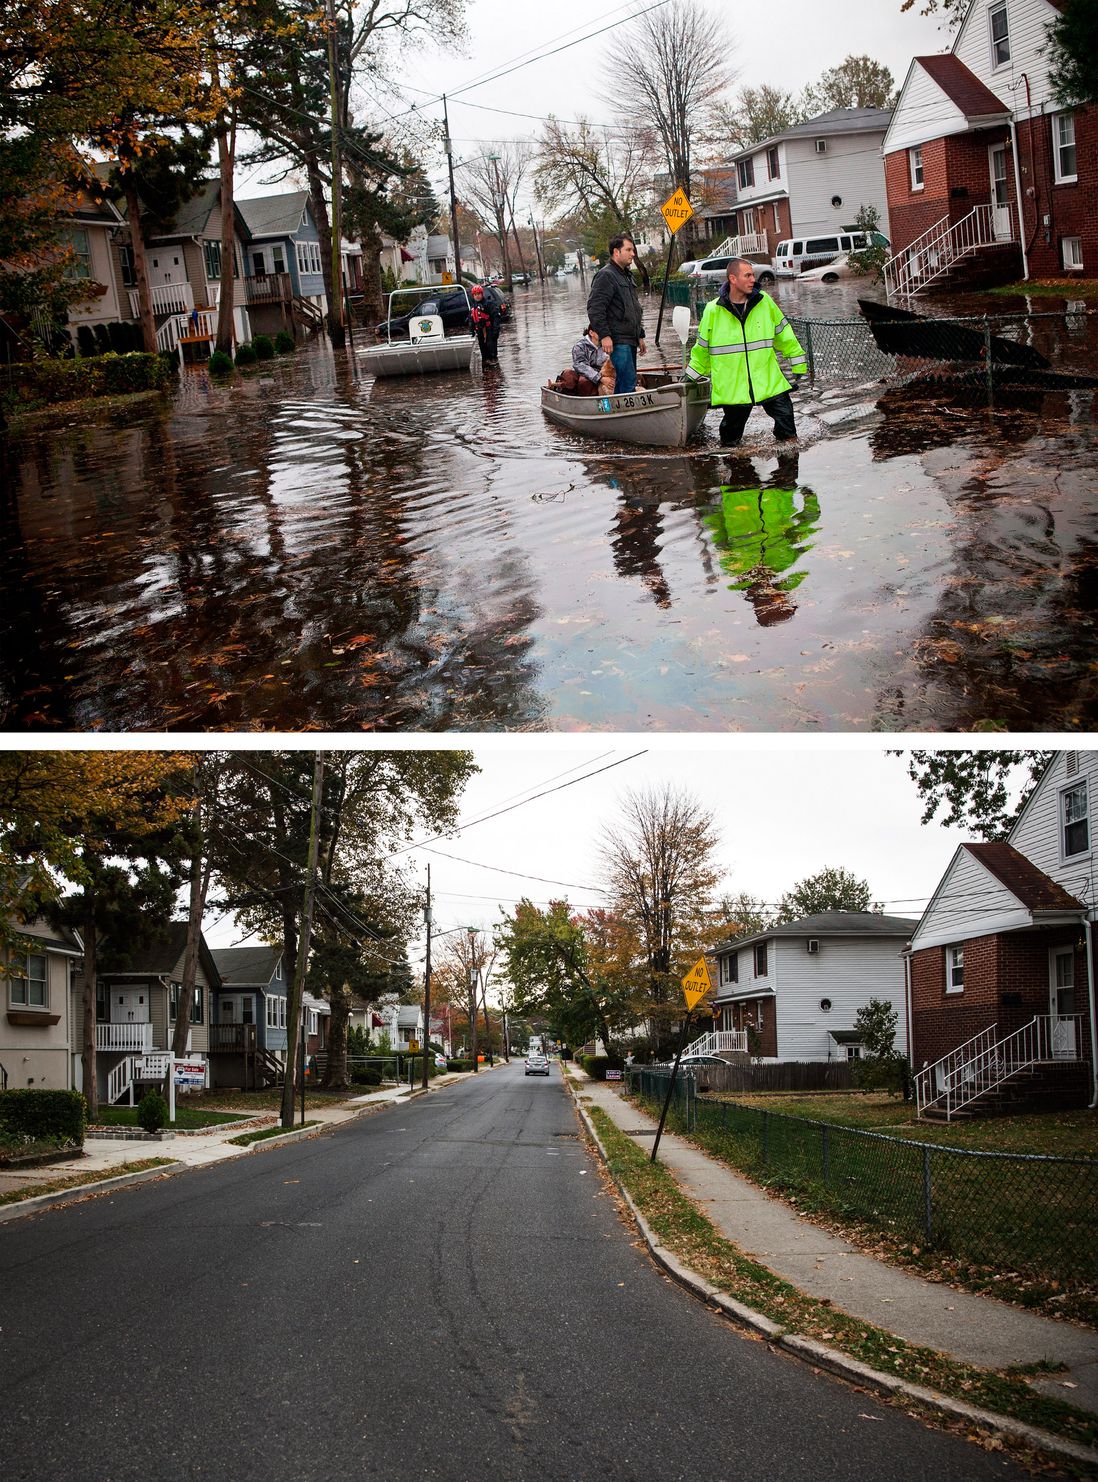 [Top] An emergency responder helps evacuate two people with a boat, after their neighborhood experienced flooding due to Superstorm Sandy October 30, 2012 in Little Ferry, New Jersey. [Bottom] The same street is shown in Little Ferry, New Jersey October 22, 2013.